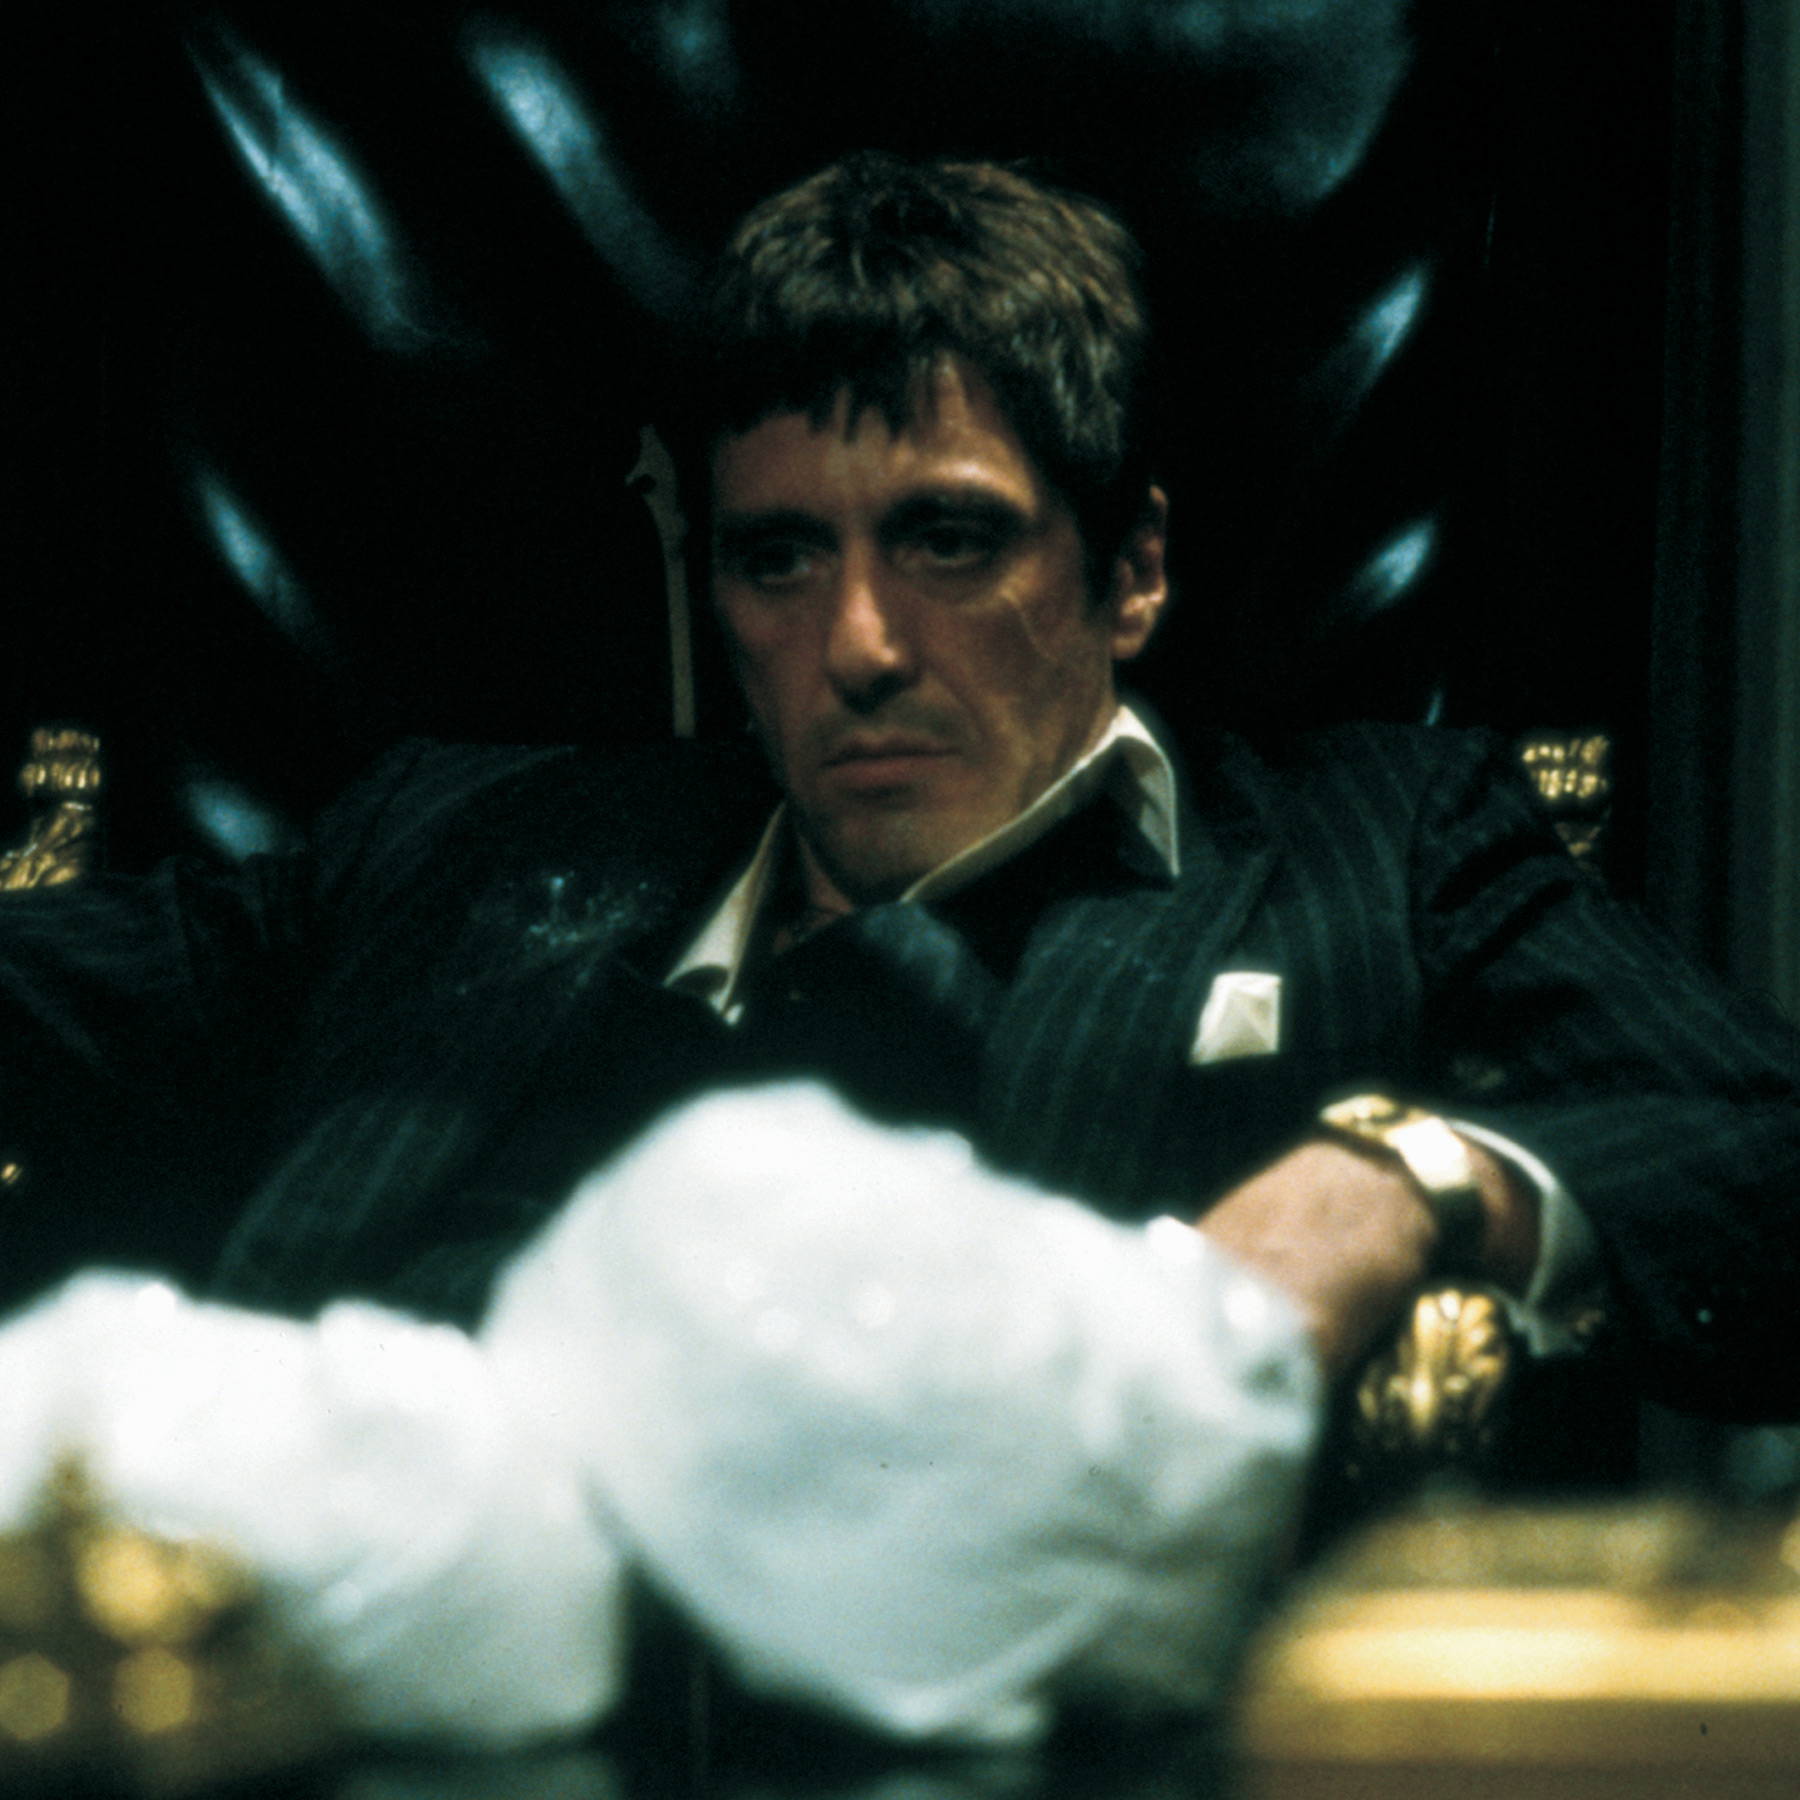 tony montana lost in hought